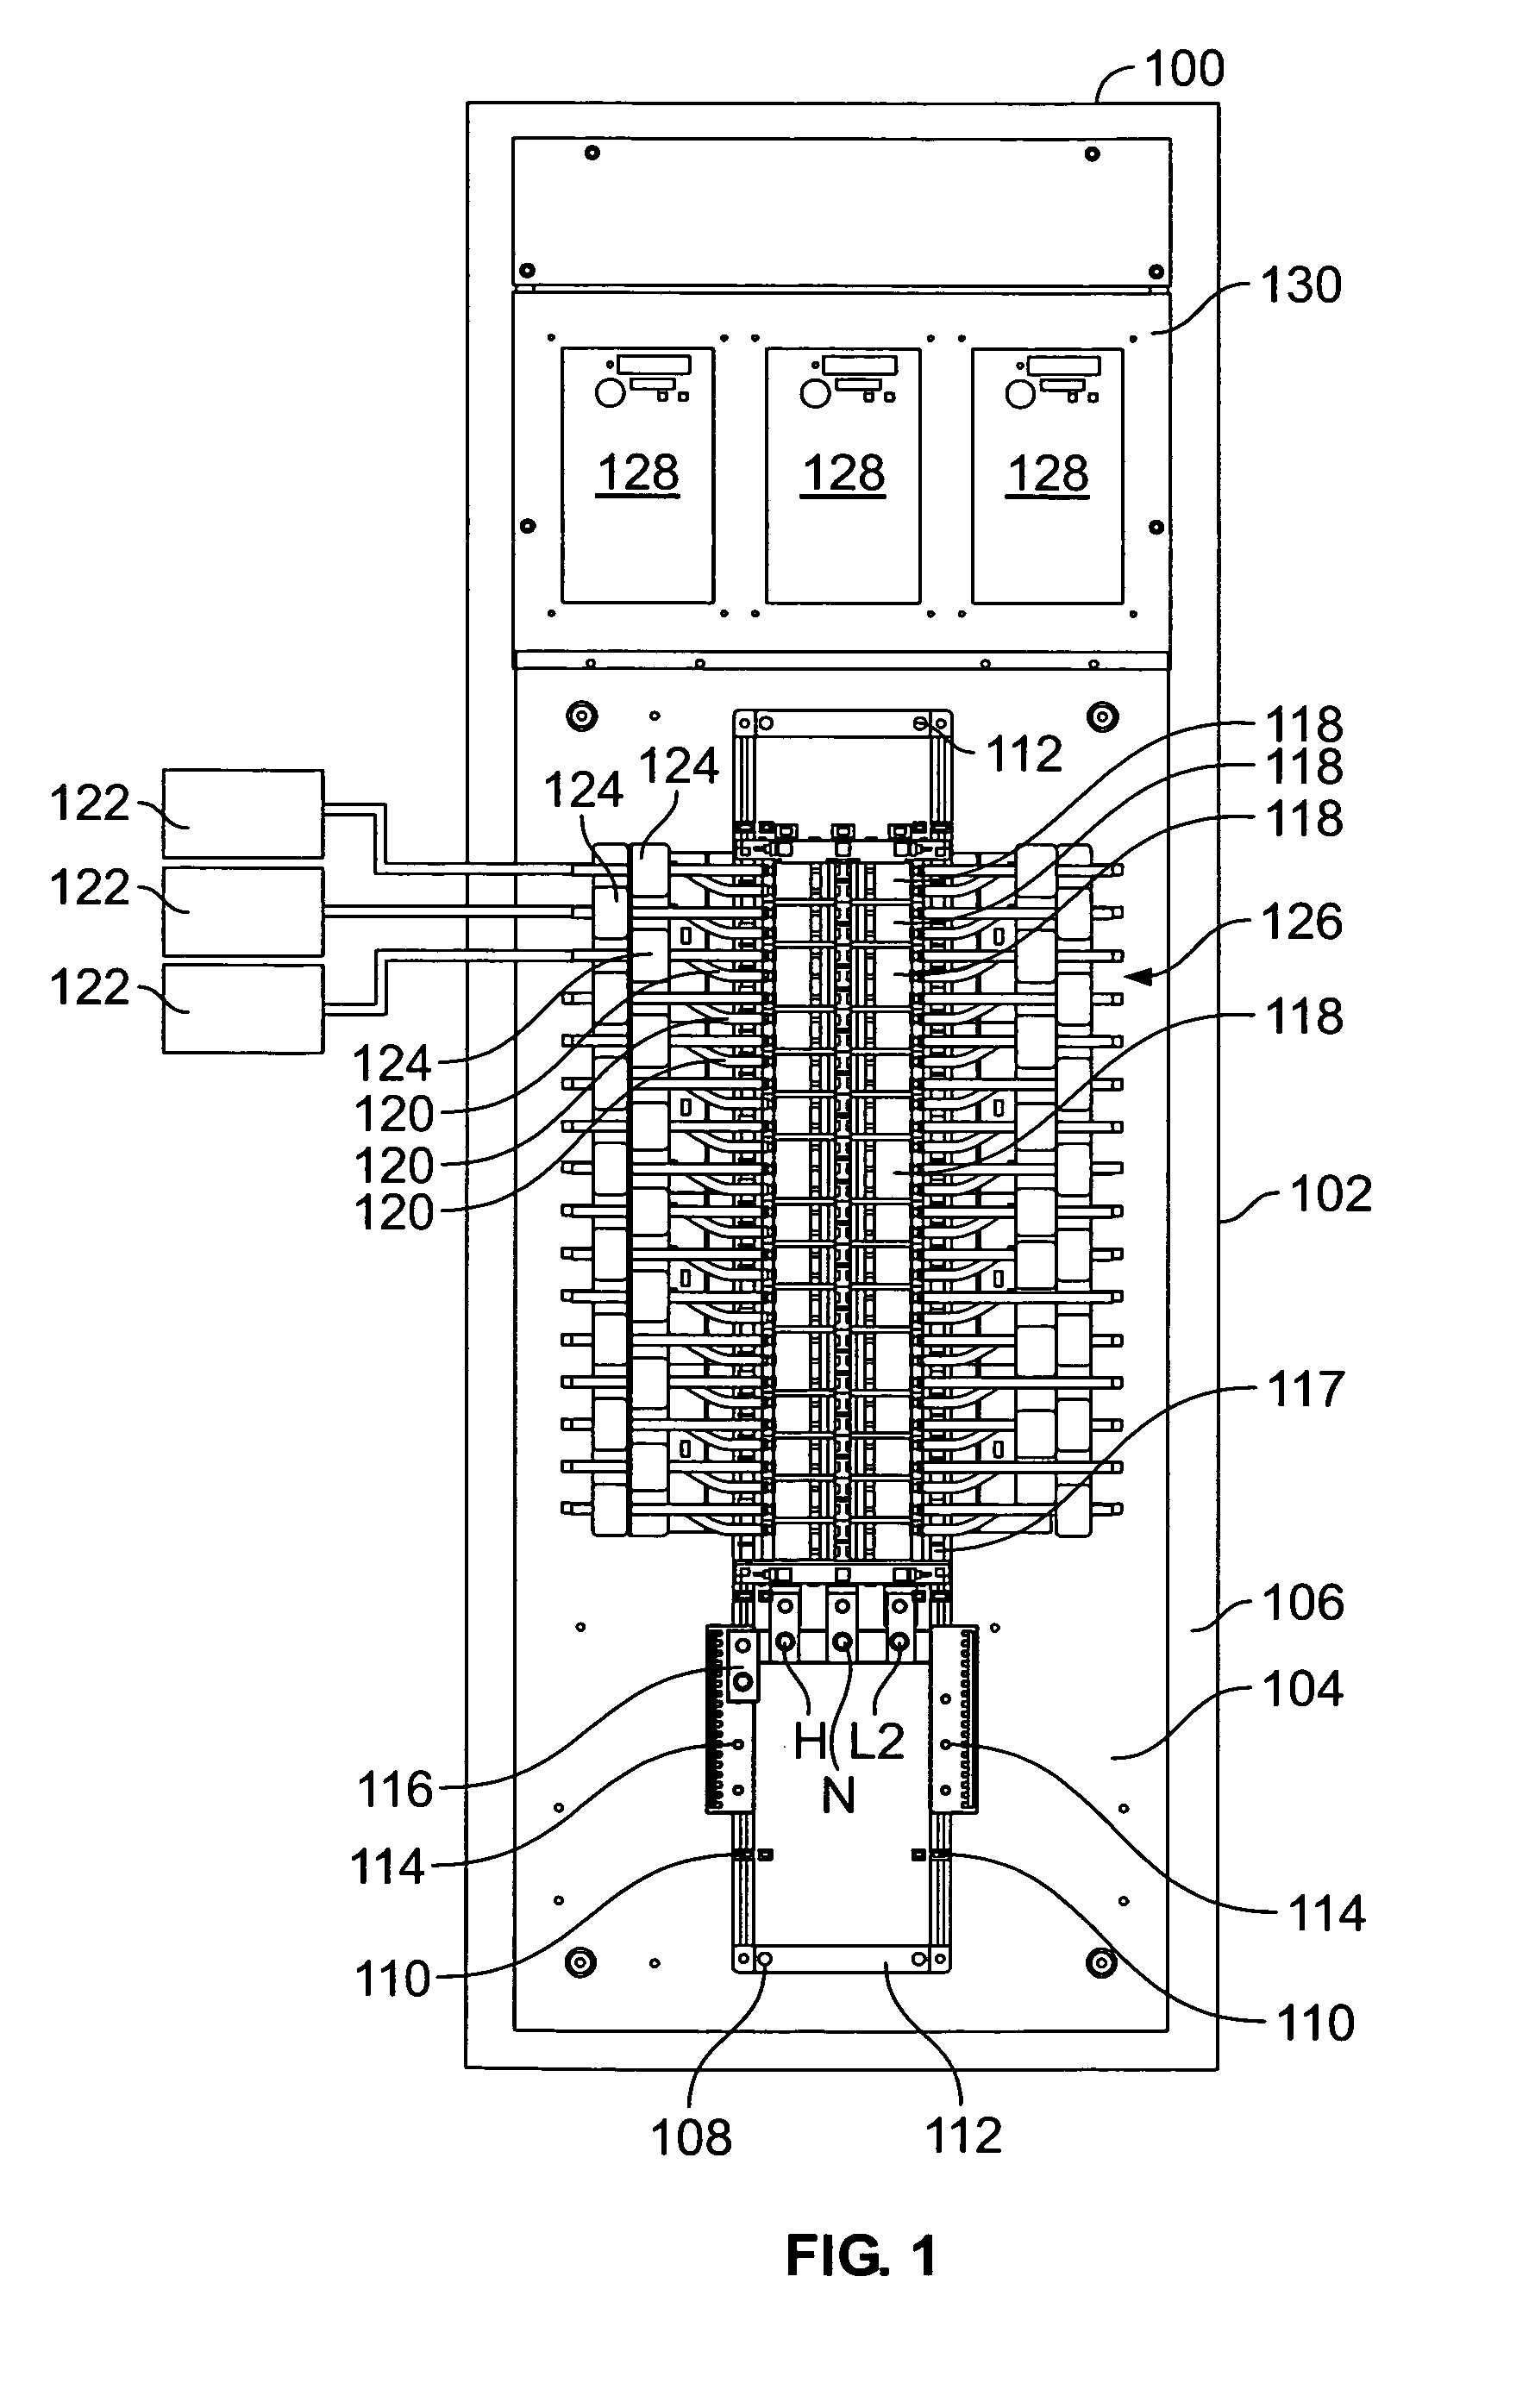 Methods and systems for electric power sub-metering